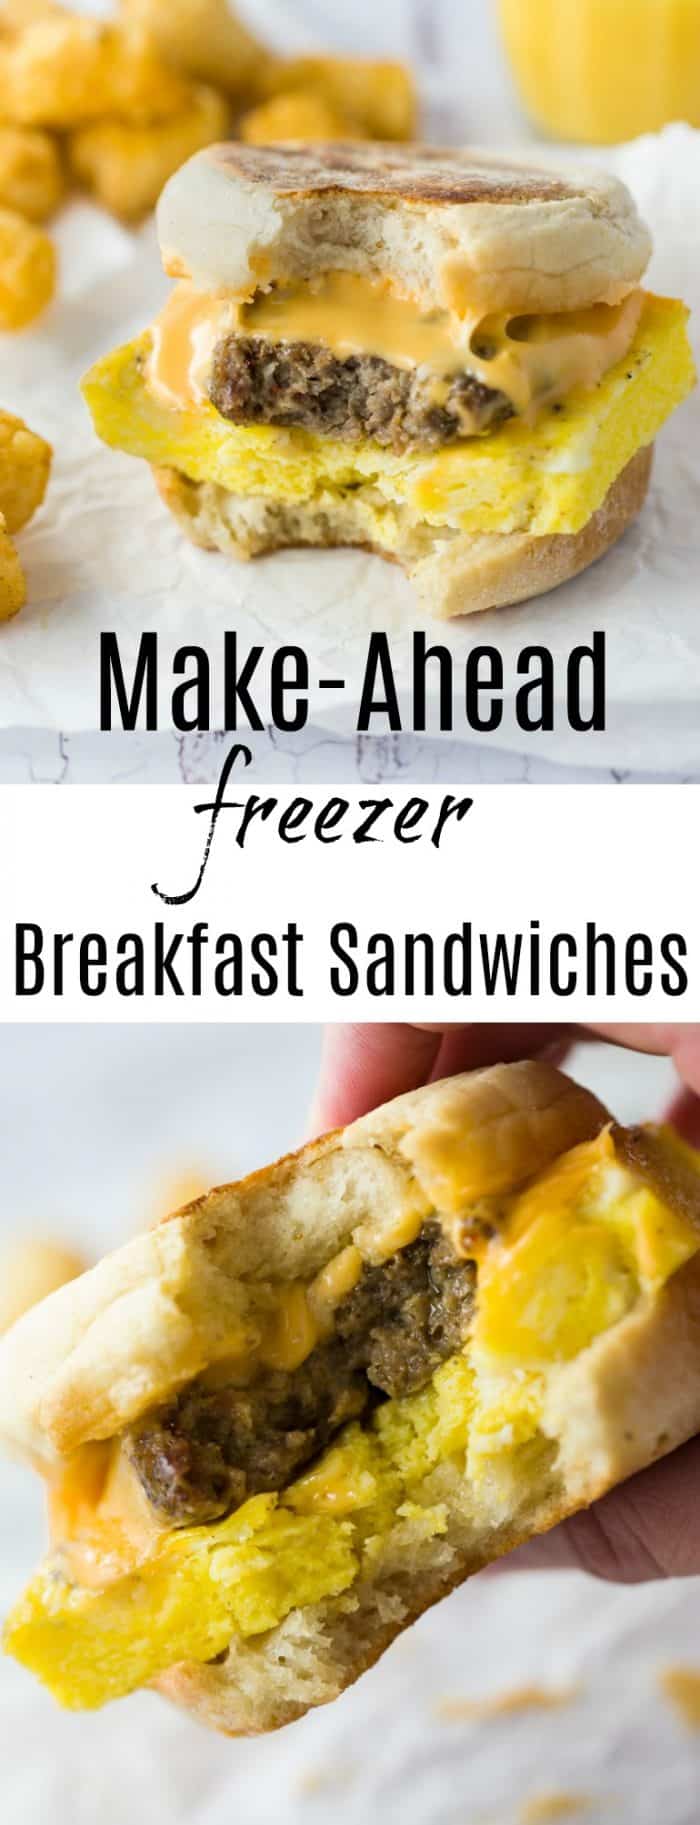 Crisp and buttery English muffins topped with fluffy eggs, bacon, sausage, and cheese. Easy to freeze ahead of time and heat in just 3 minutes! | The Cozy Cook | #breakfast #eggs #sandwich #sandwiches #mealprep #makeaheadmeals #comfortfood #sausage #meat #protein #recipe #easyrecipes #freezermeals